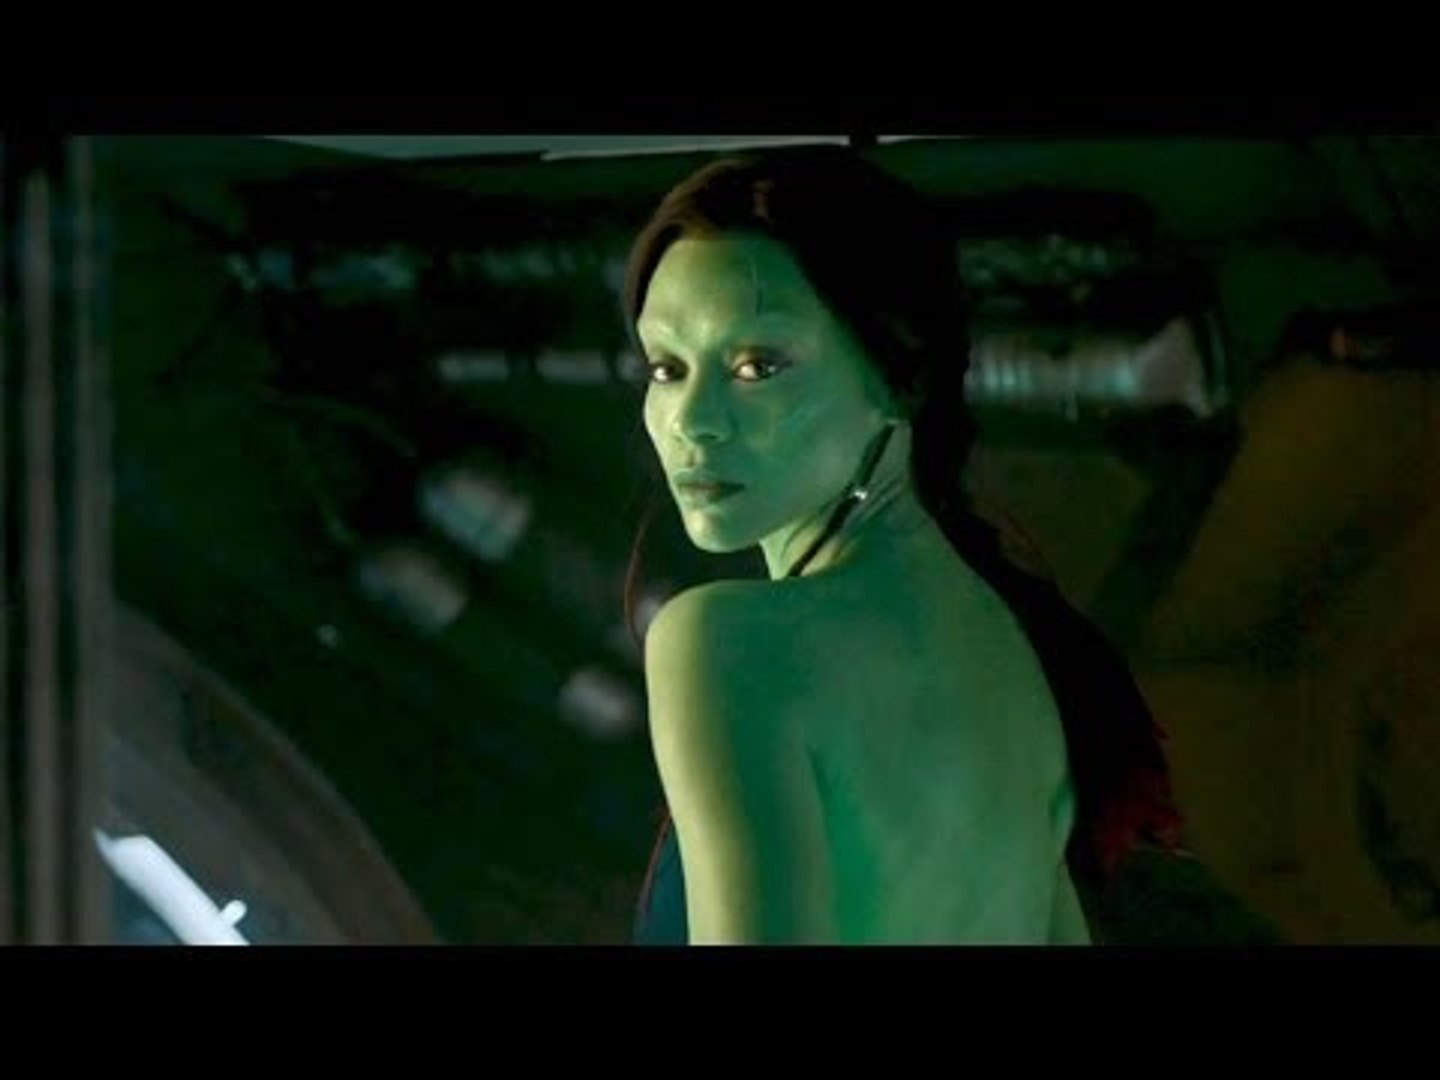 GUARDIANS OF THE GALAXY "Gamora" Character Trailer - video Dailymotion